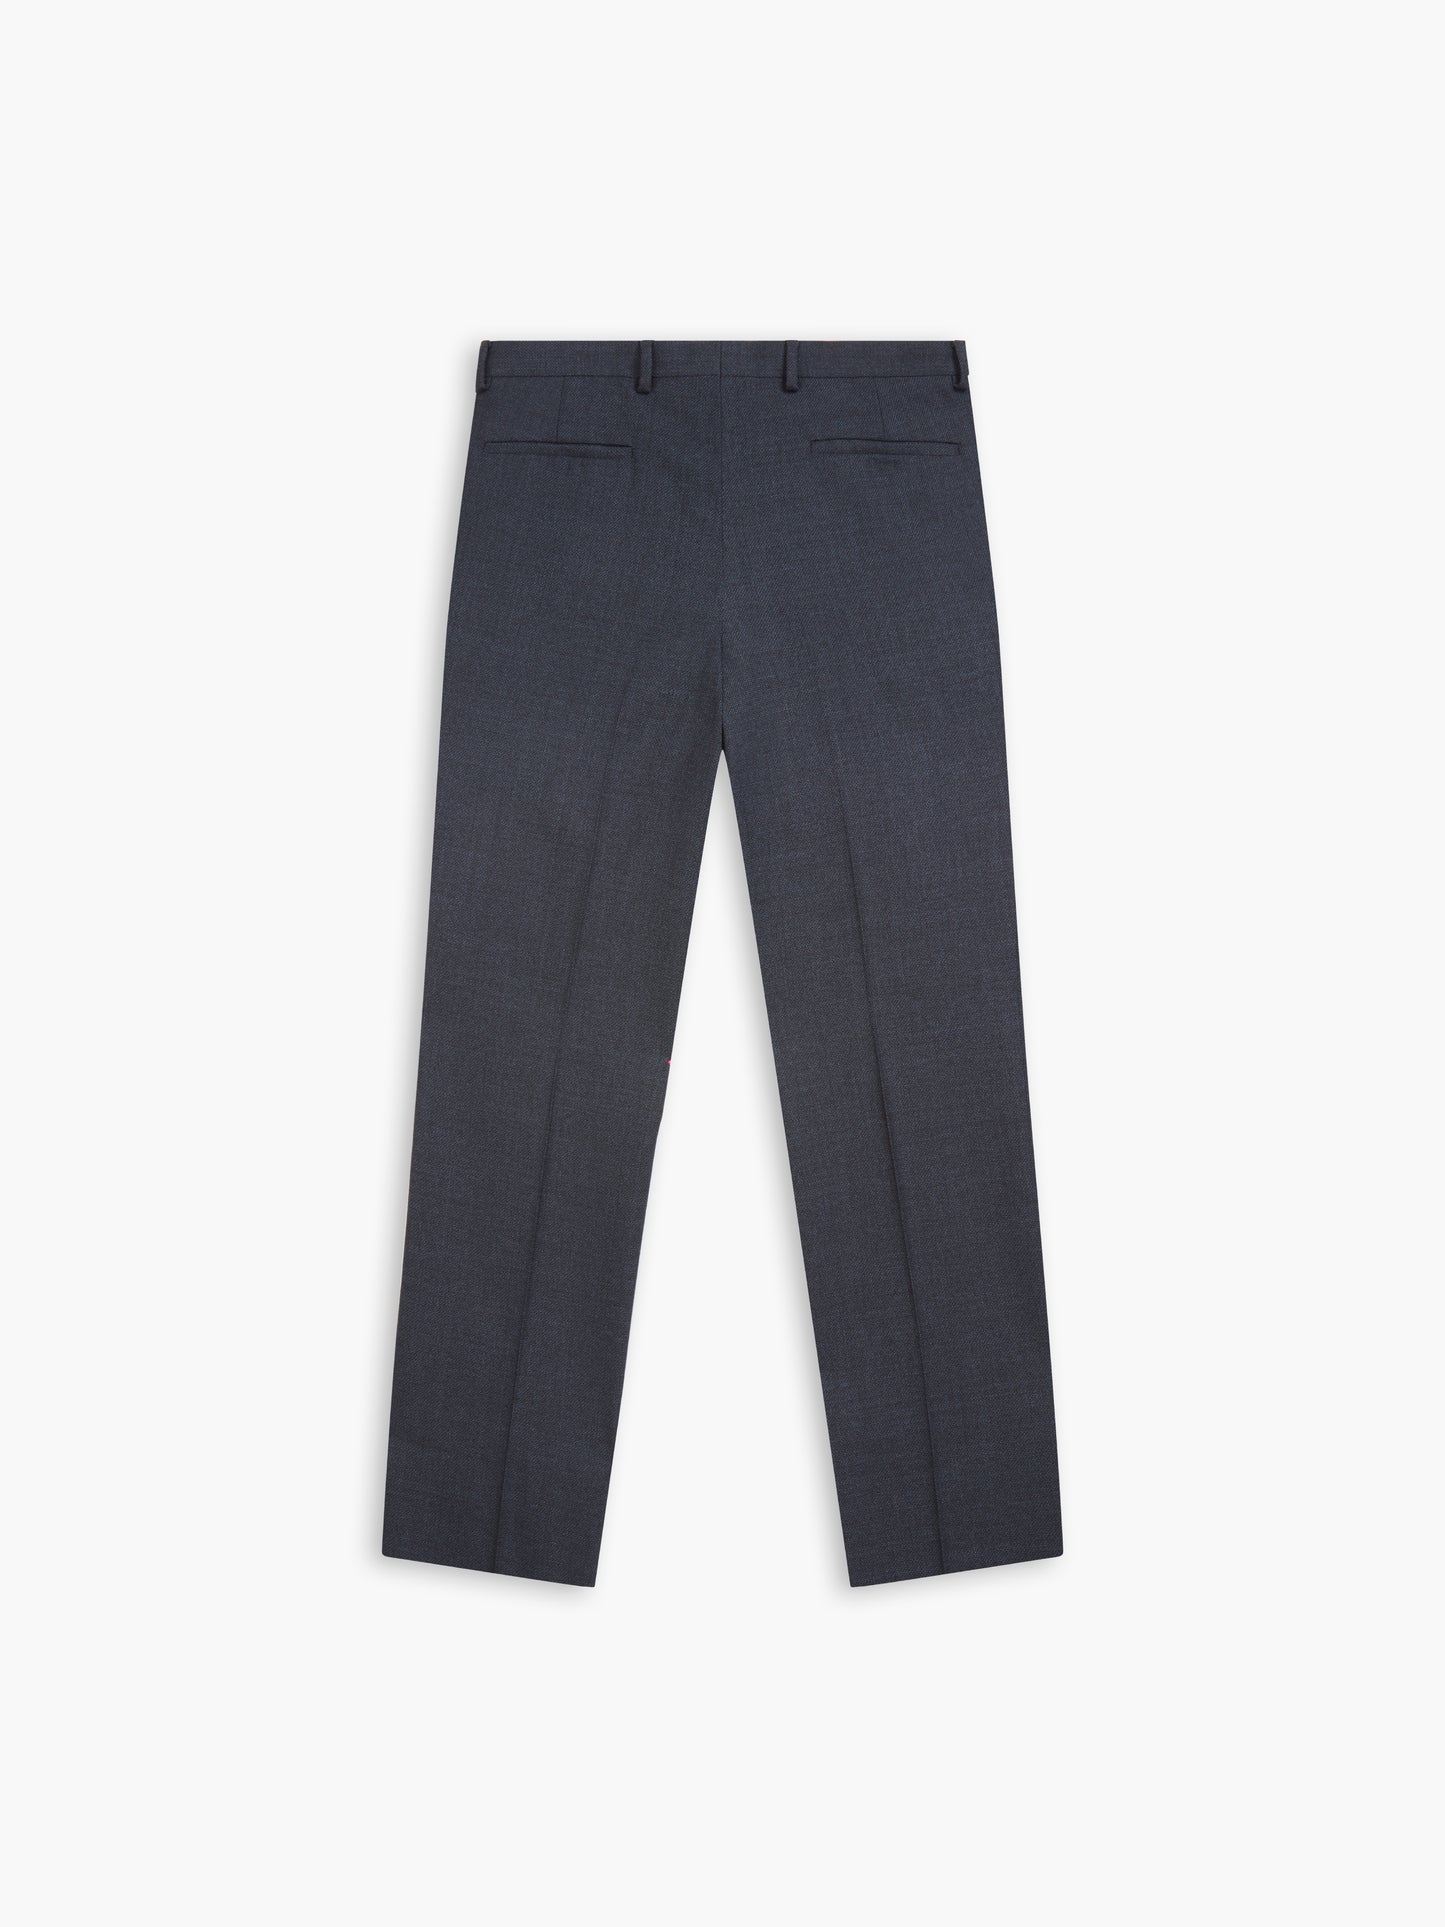 Wordsworth Woven in England Slim Fit Navy Micro Puppytooth Trousers